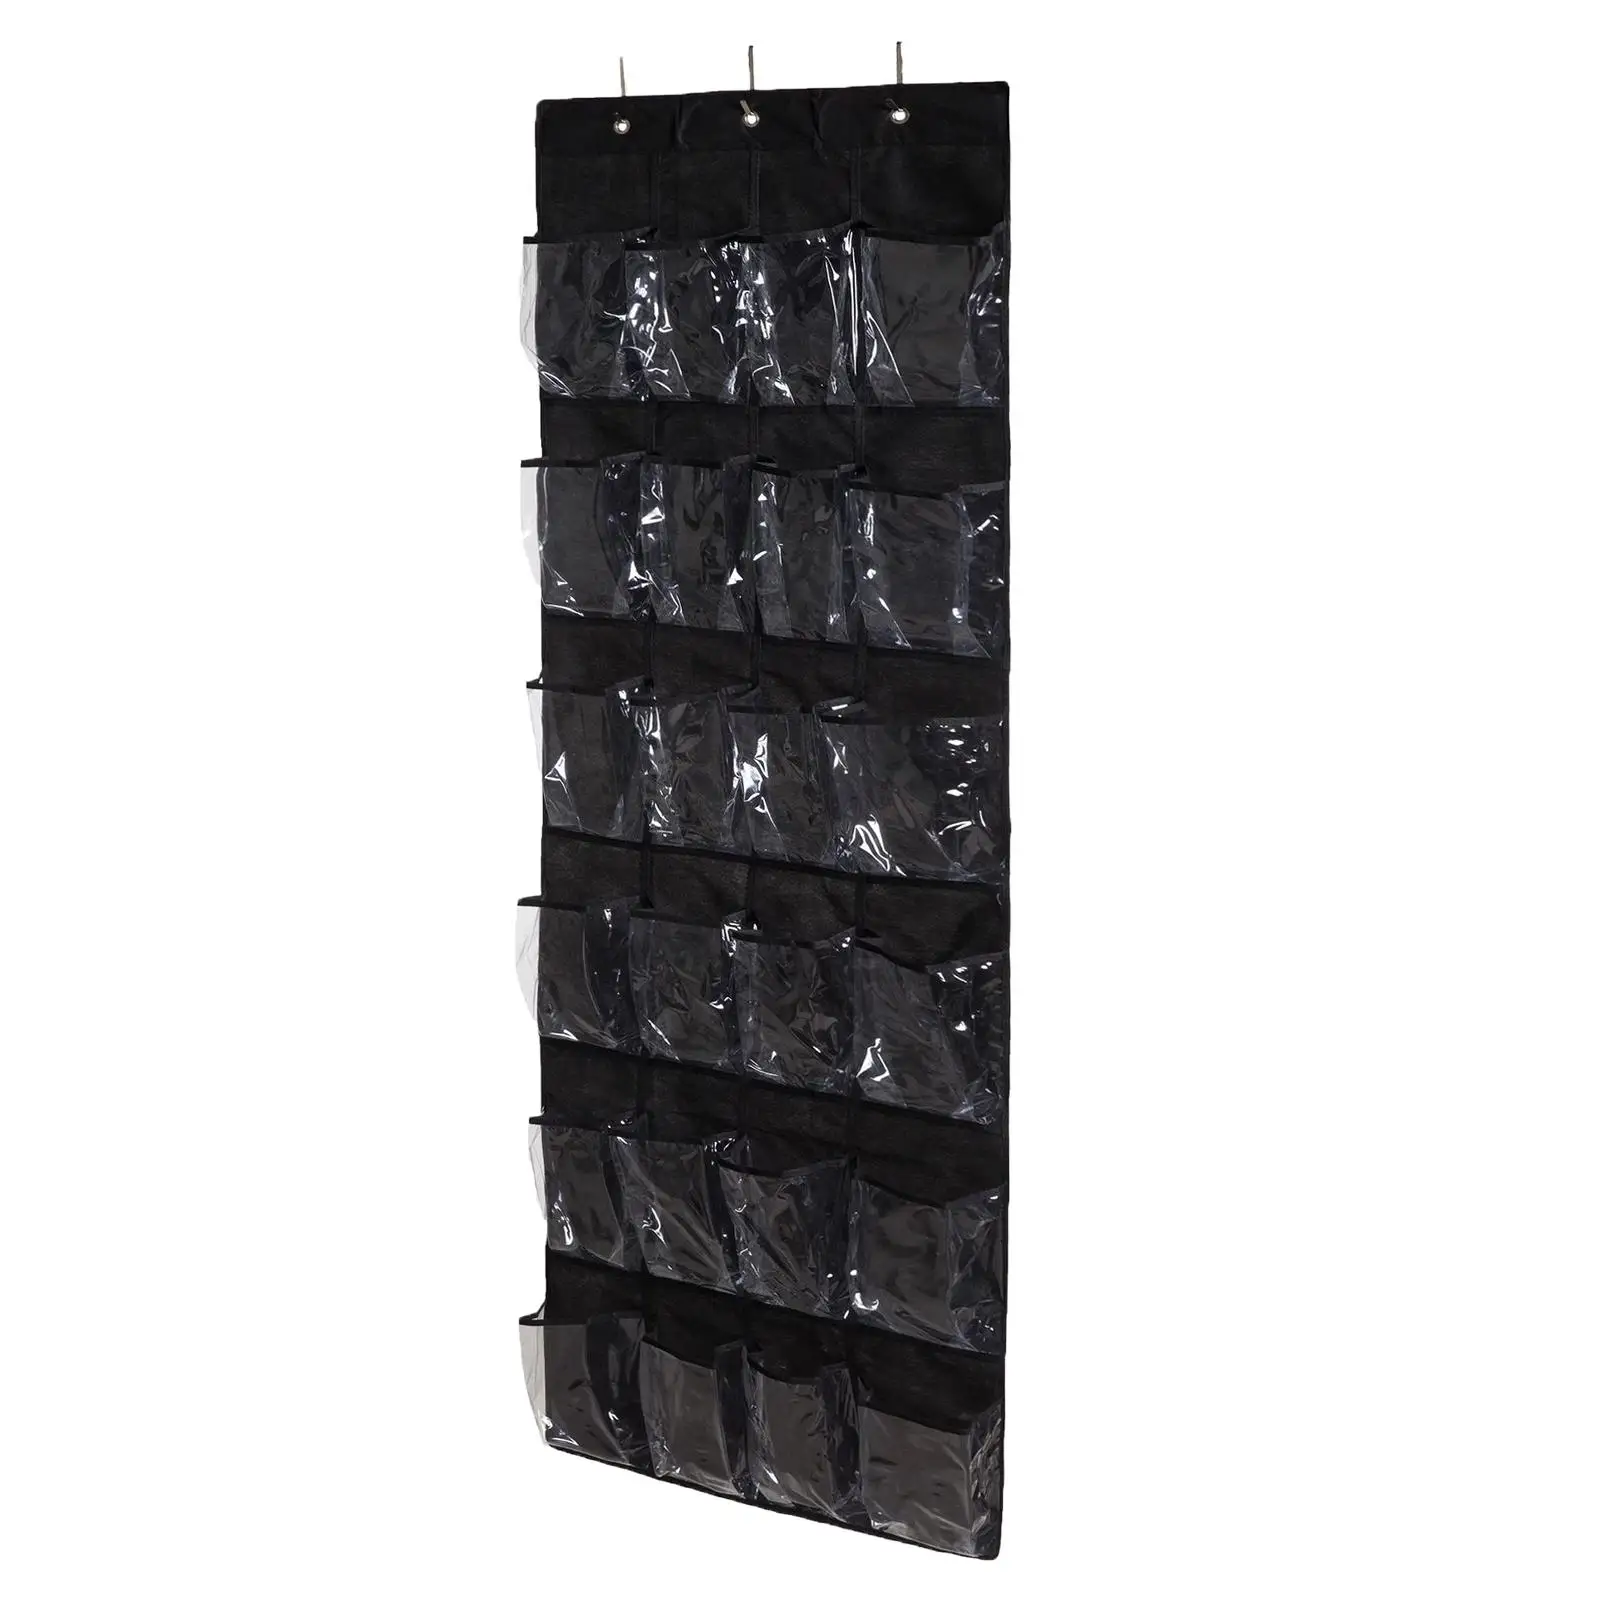 Over The Door shoe organizer, shoe hanger with 24 fabric pockets for